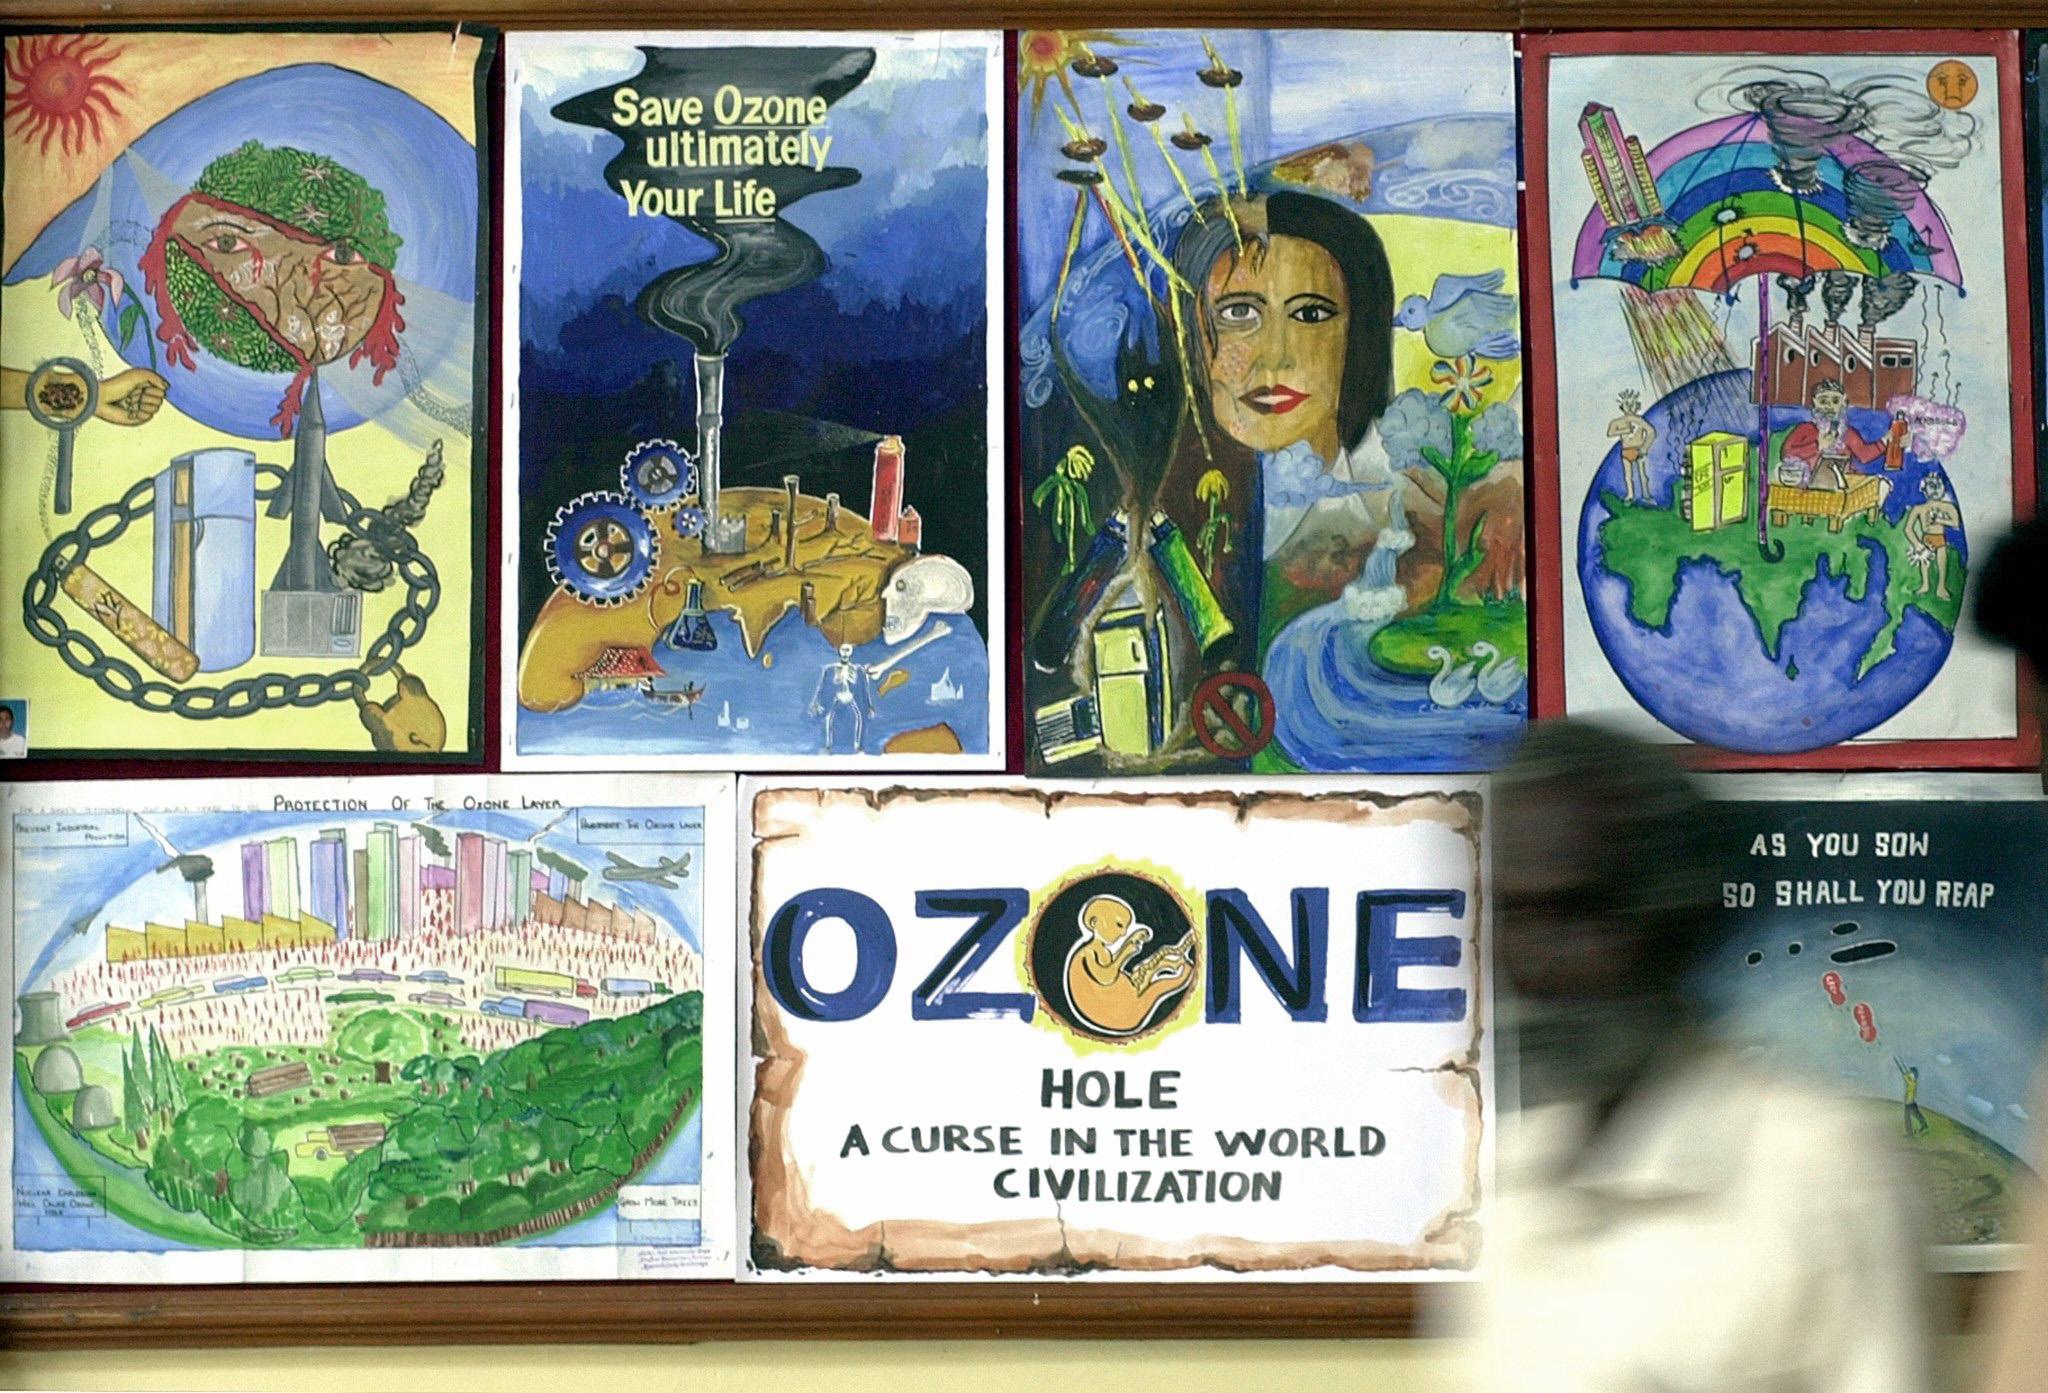 Posters encouraging people to save the ozone layer.